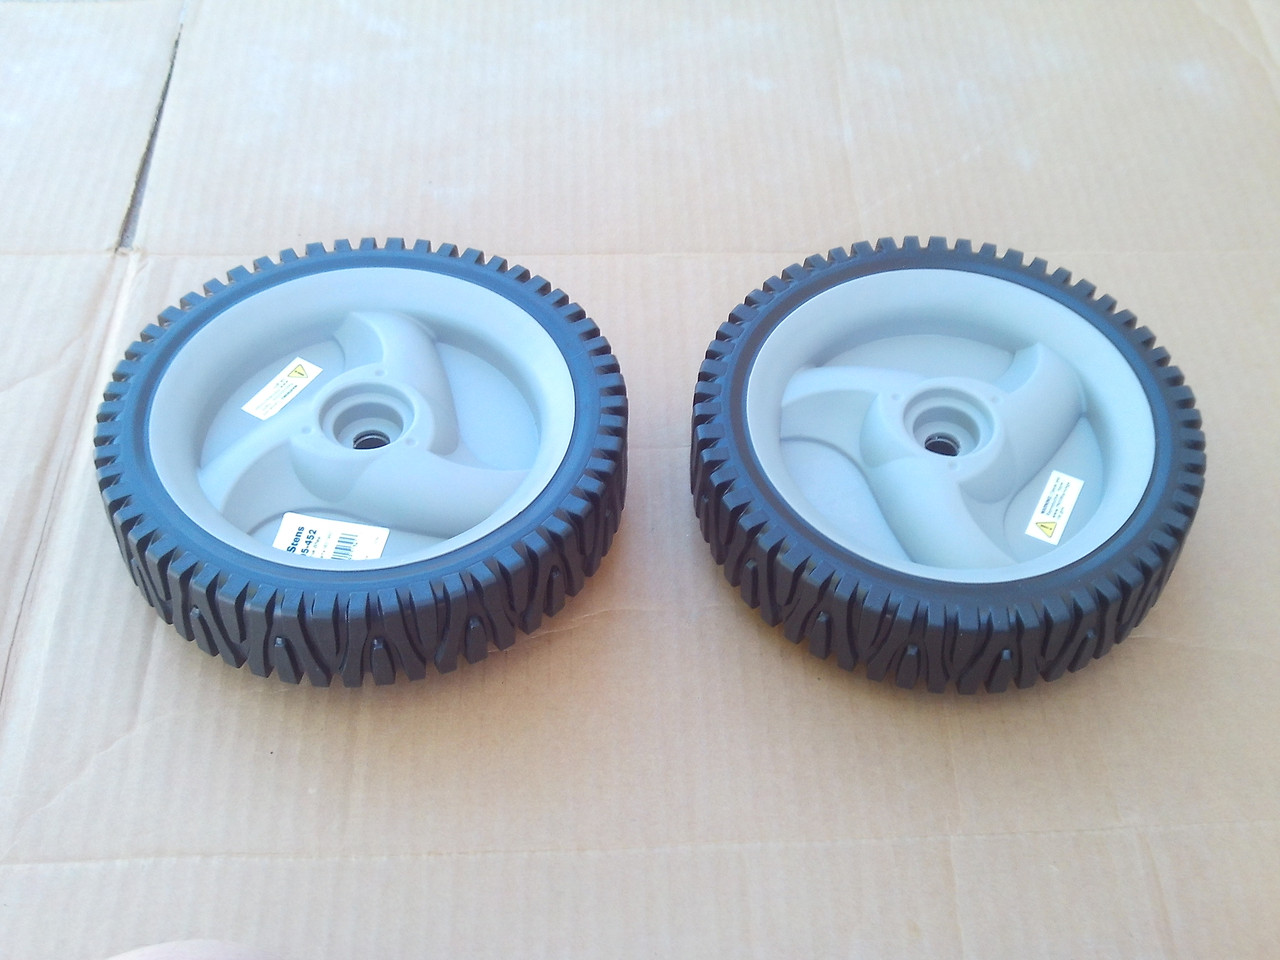 Drive Wheels for Craftsman 583719501 Wheel Set of 2 Self Propelled, Height 8" Width 1-3/4" Bore Size 1/2" Teeth on gear 53